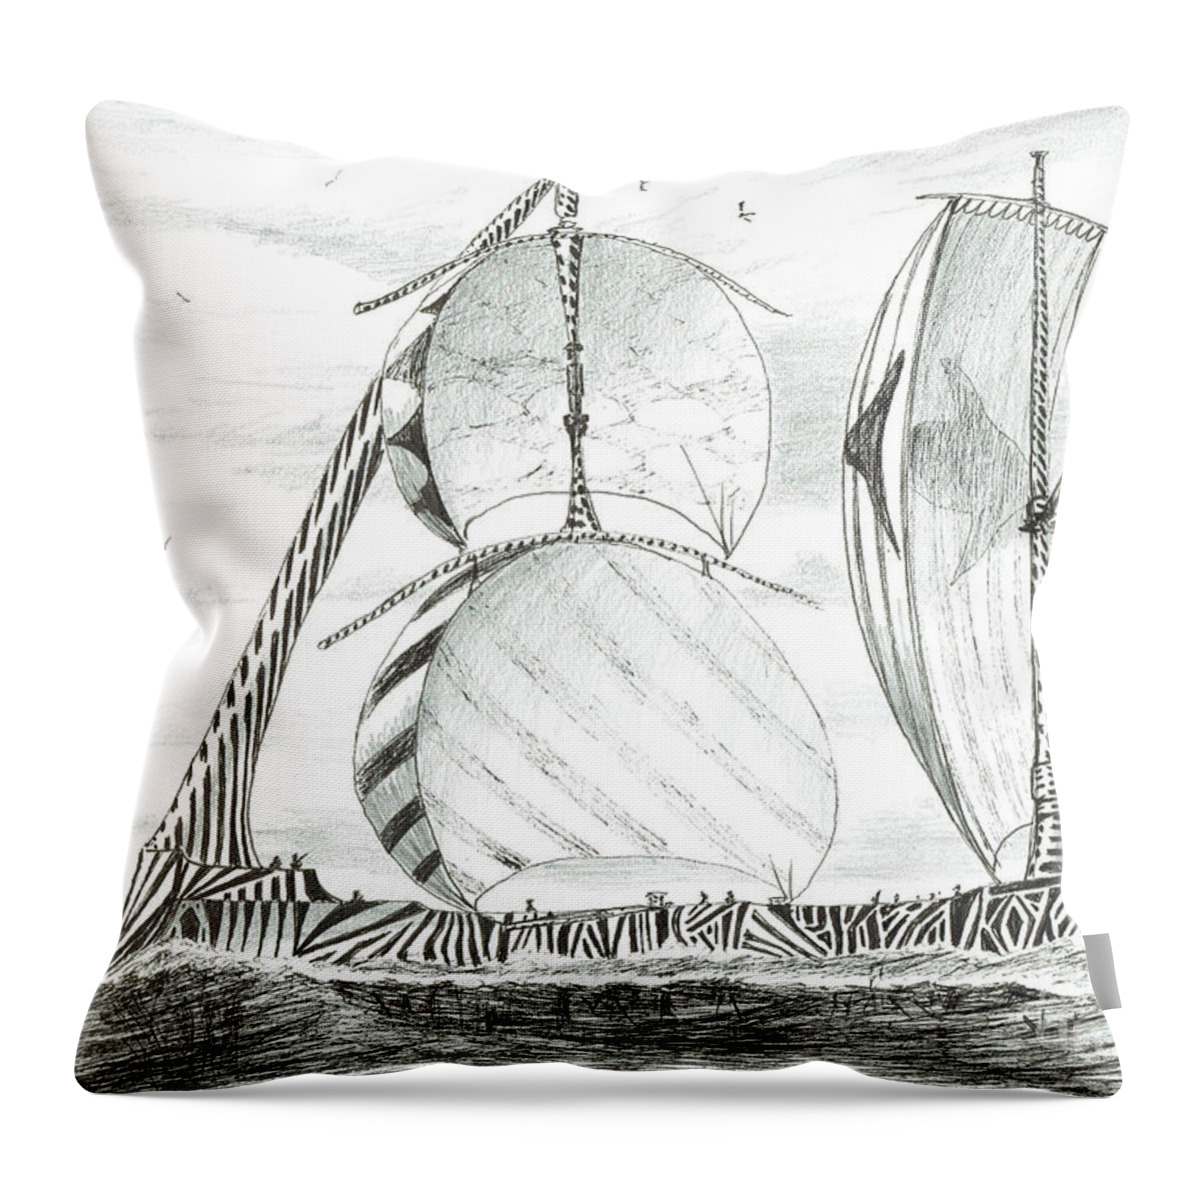 21st Century Throw Pillow featuring the painting Storm Creators Gulf Of Boothia, 2022 by Vincent Alexander Booth